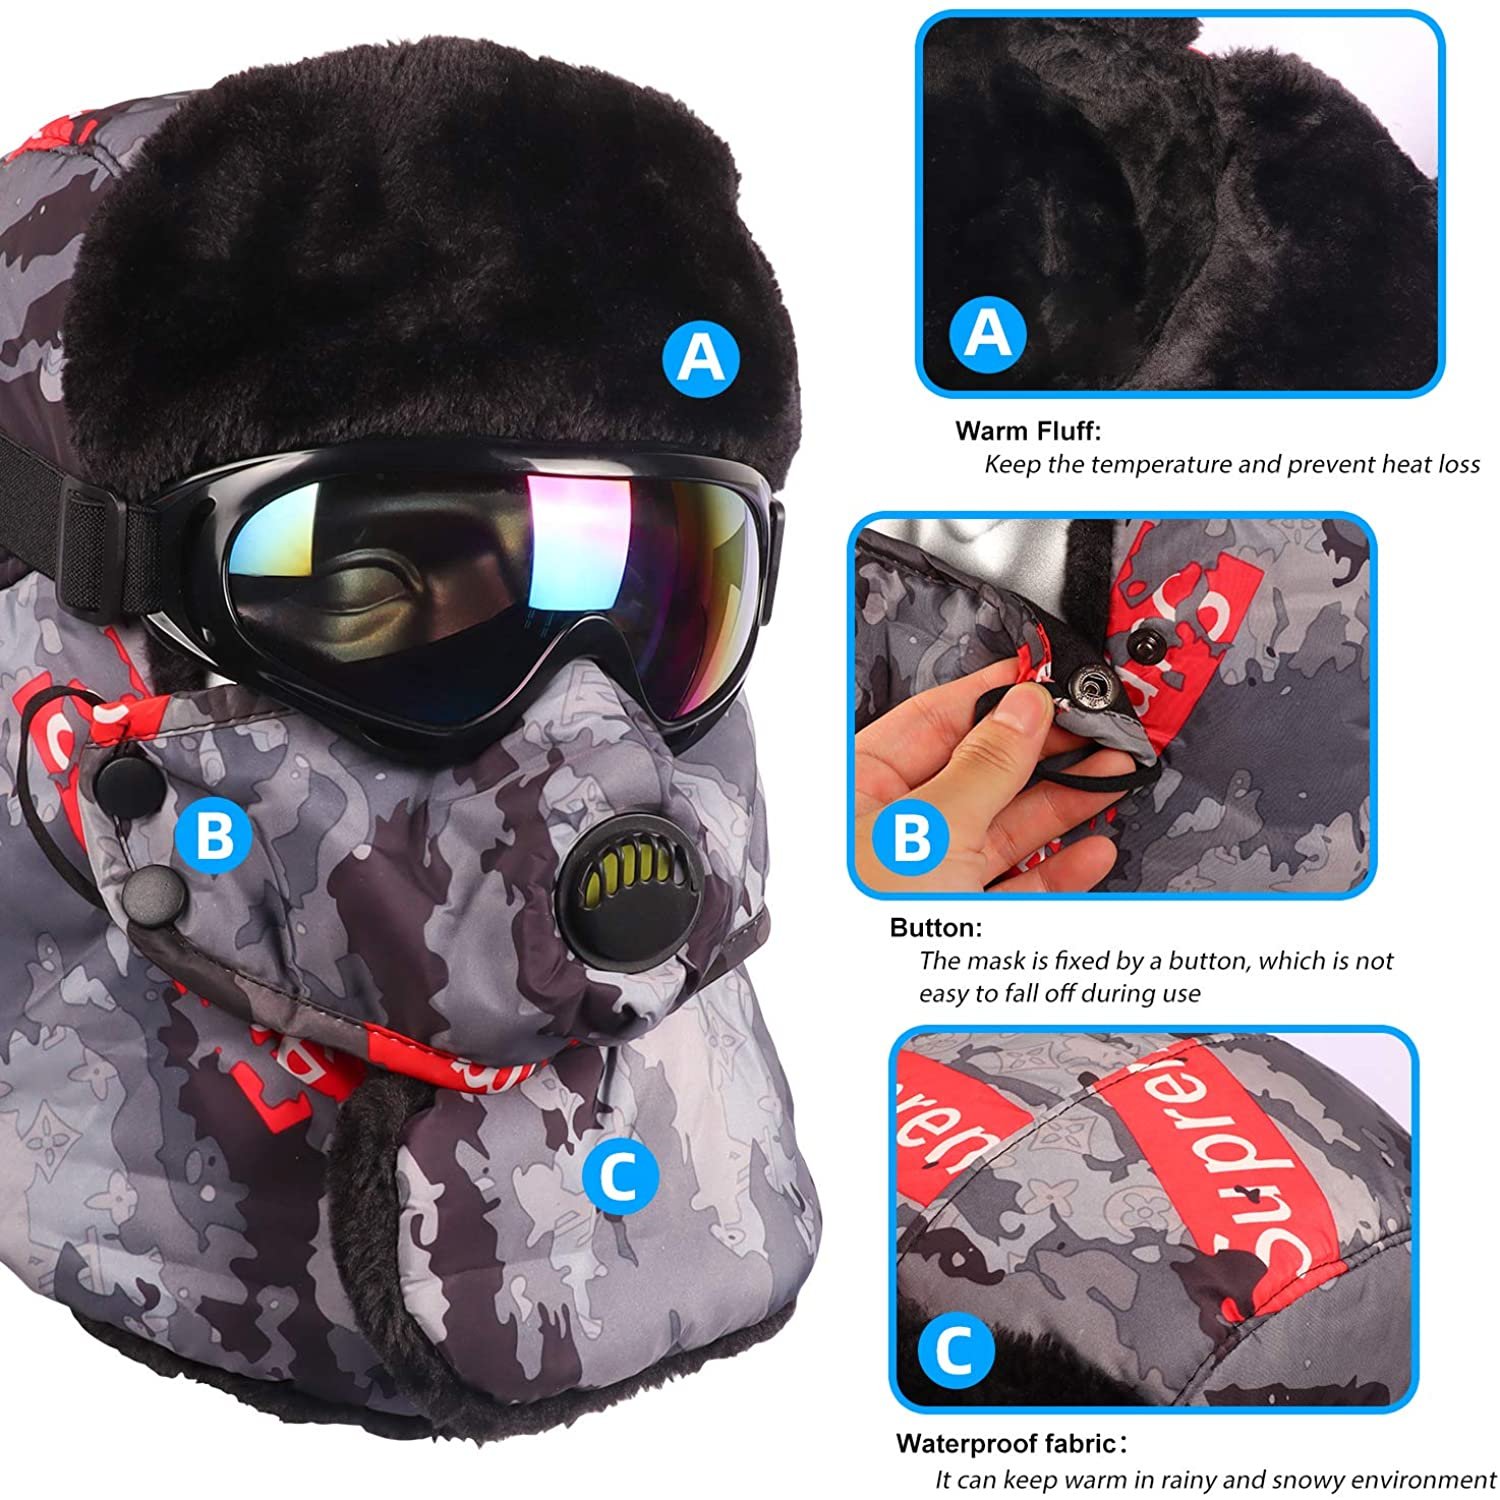 This All-In-One 'Winter Trapper Hat' Features A Mask, Scarf And Sunglasses